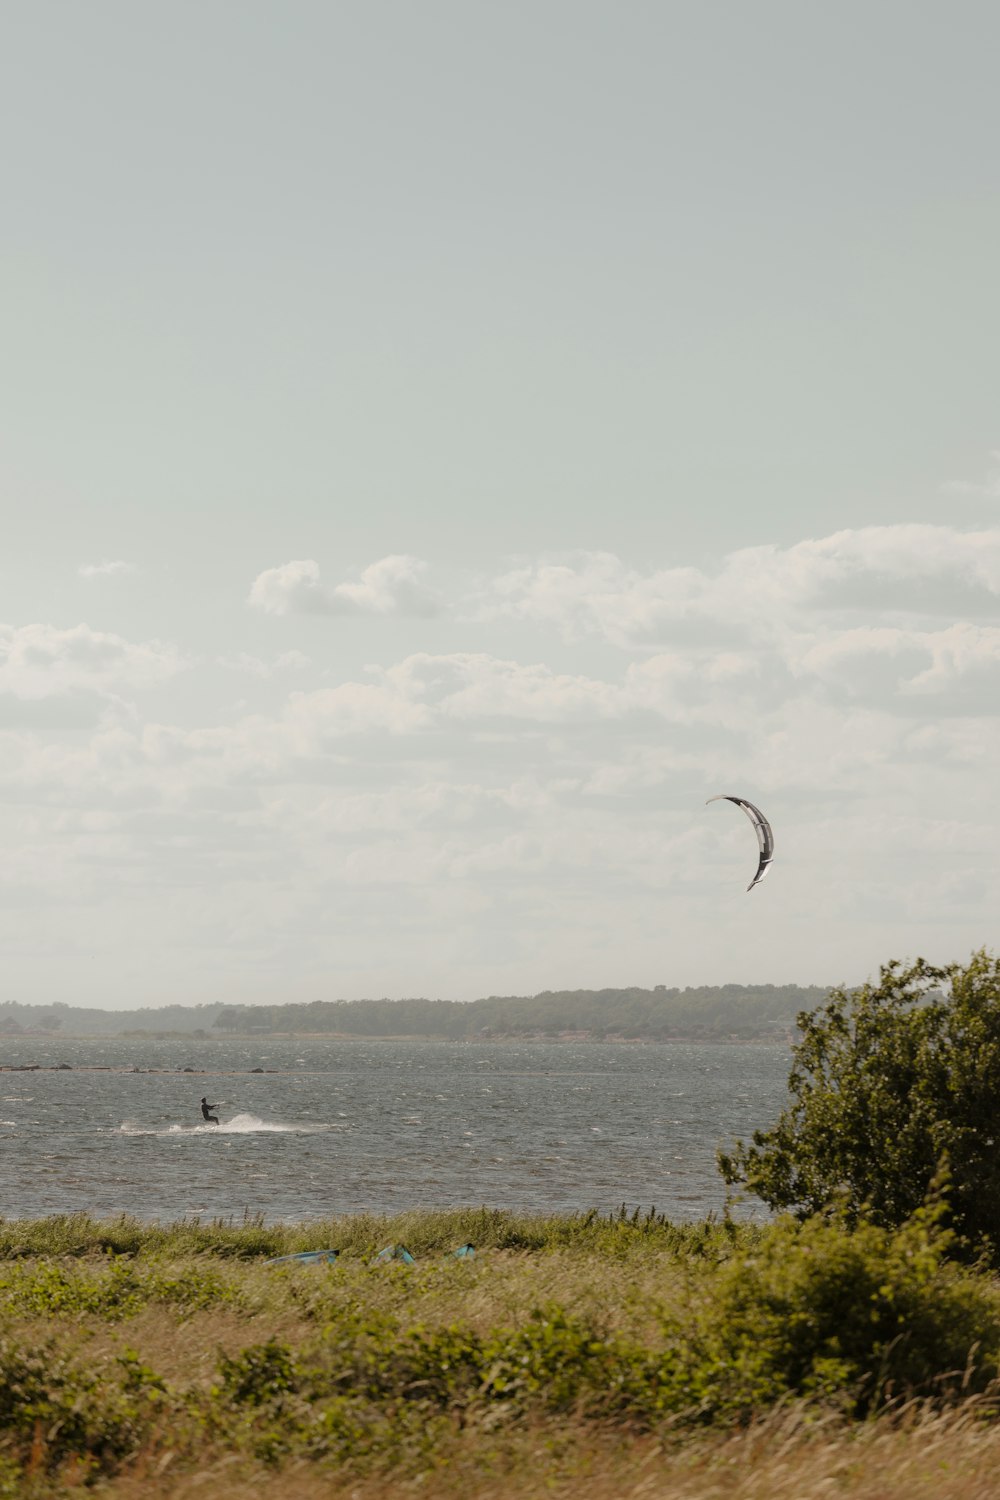 a person kite surfing in the sea